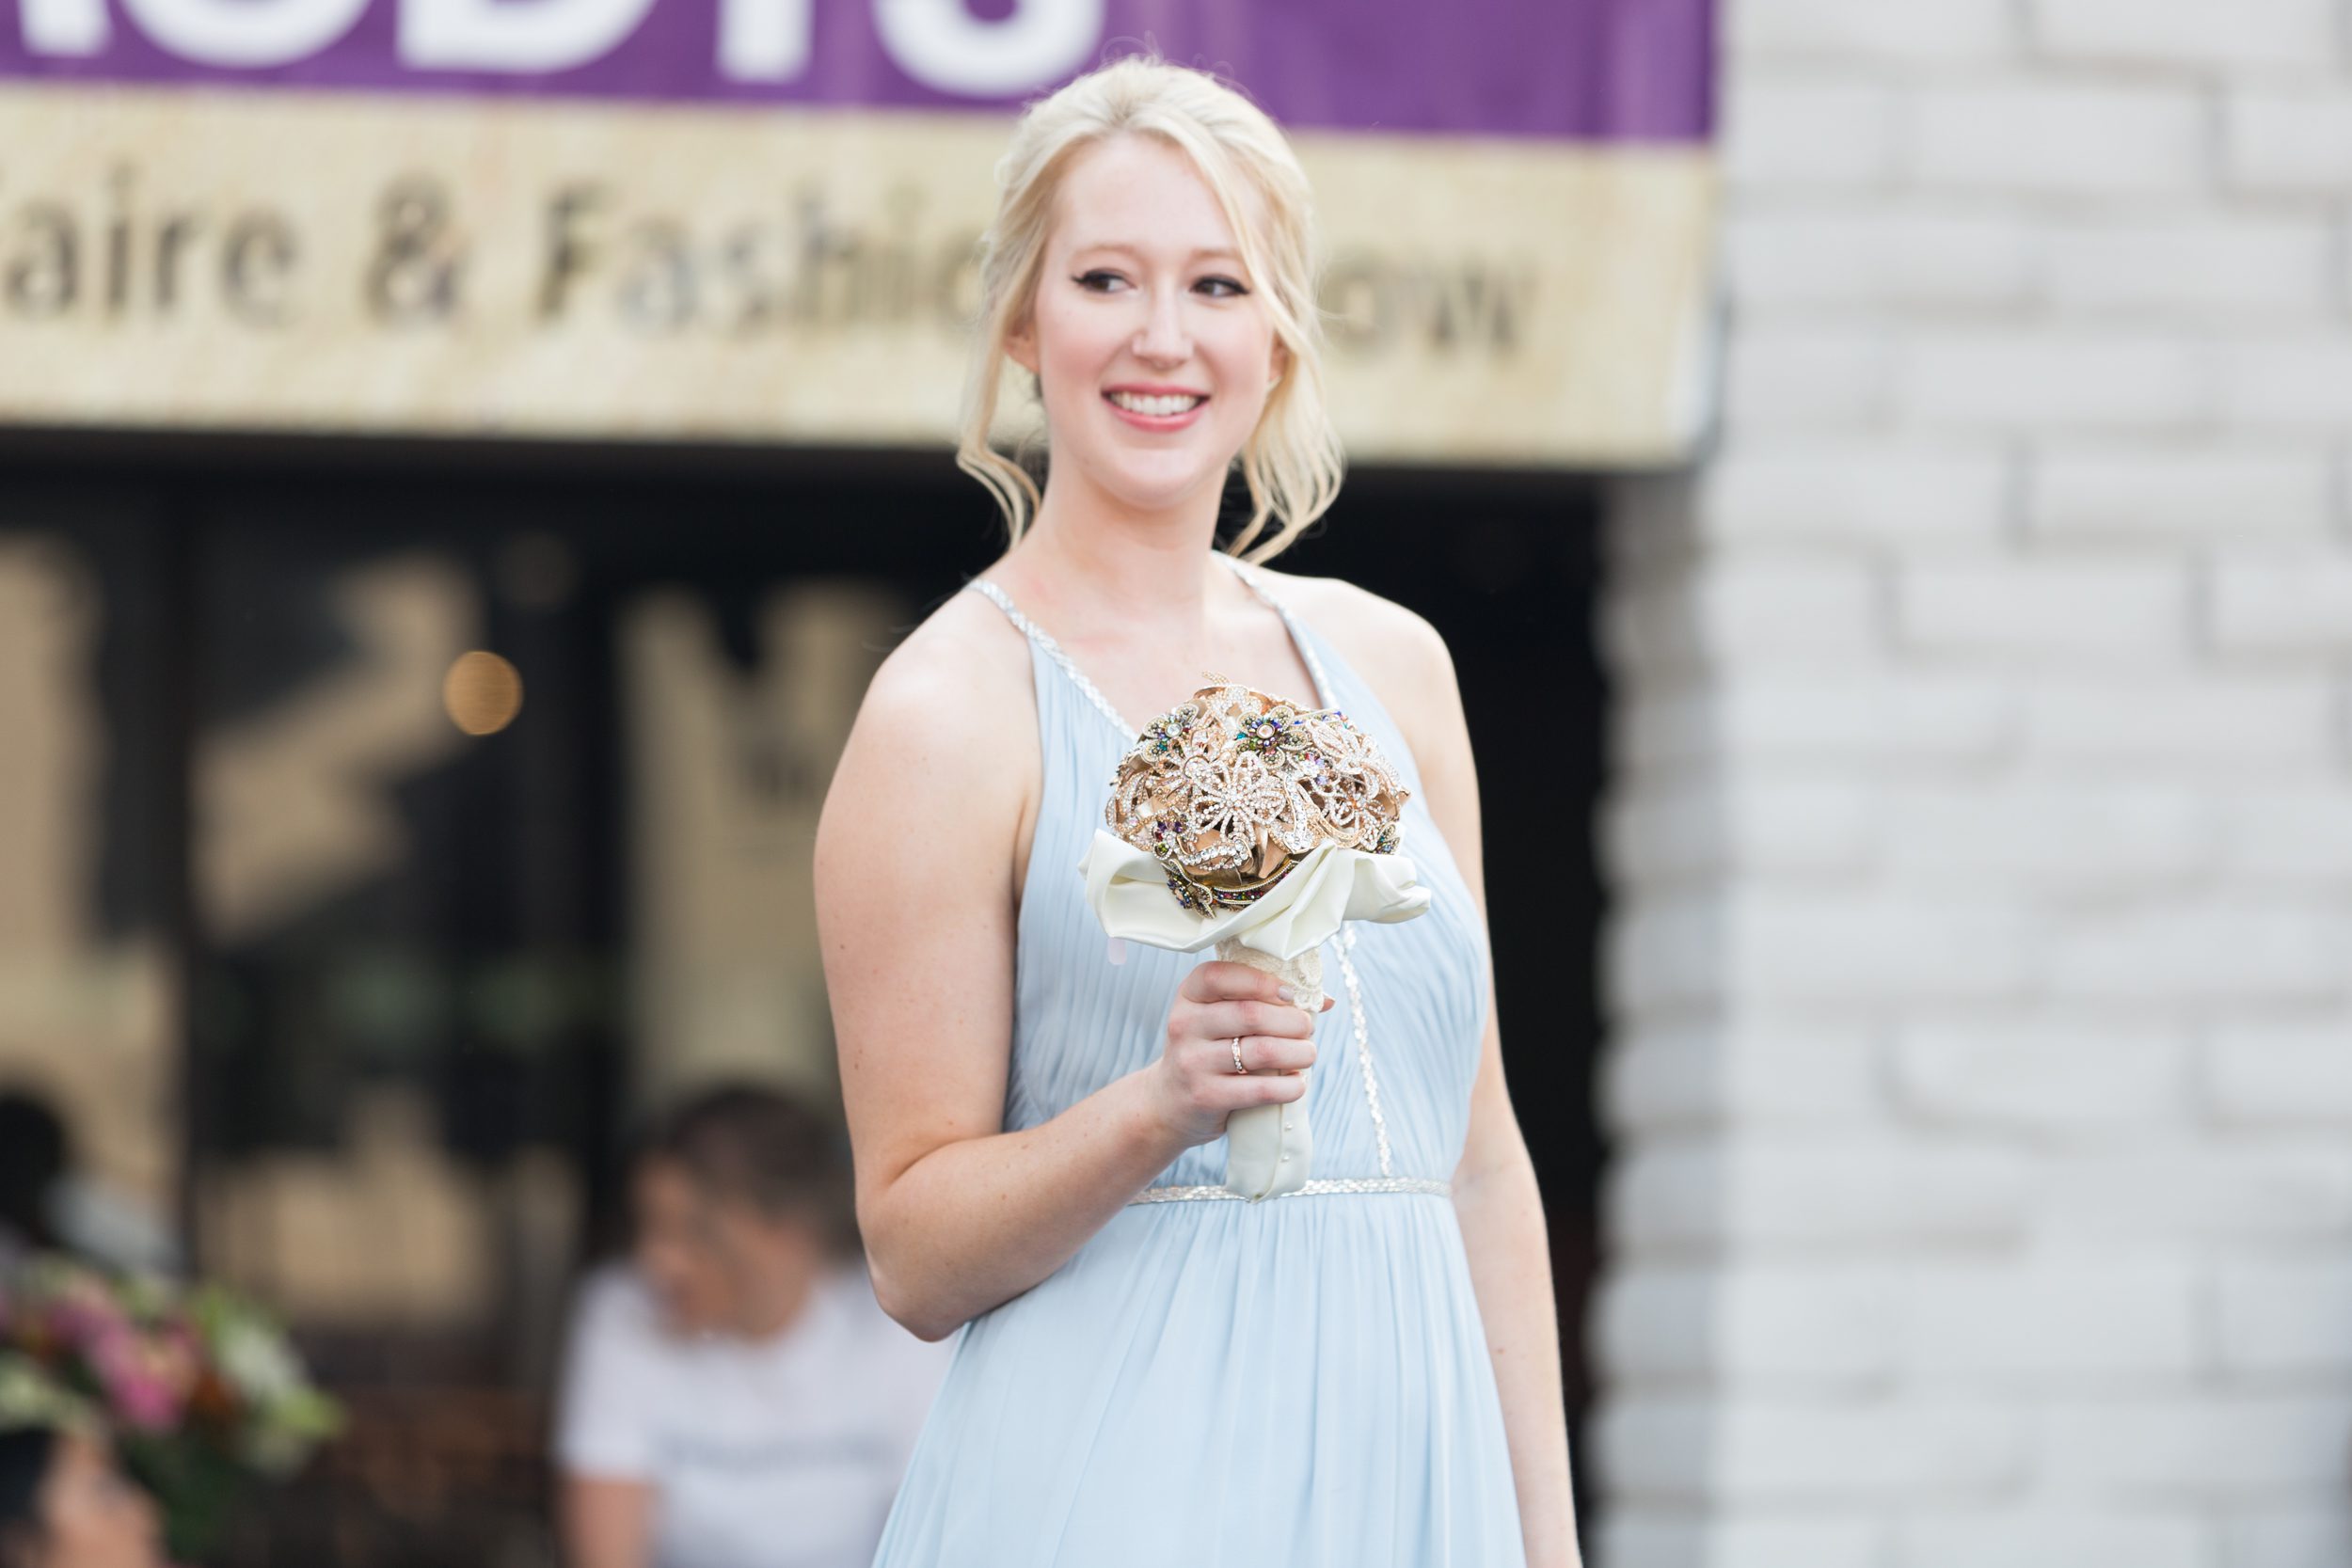 personal brand photography, wedding bouquets